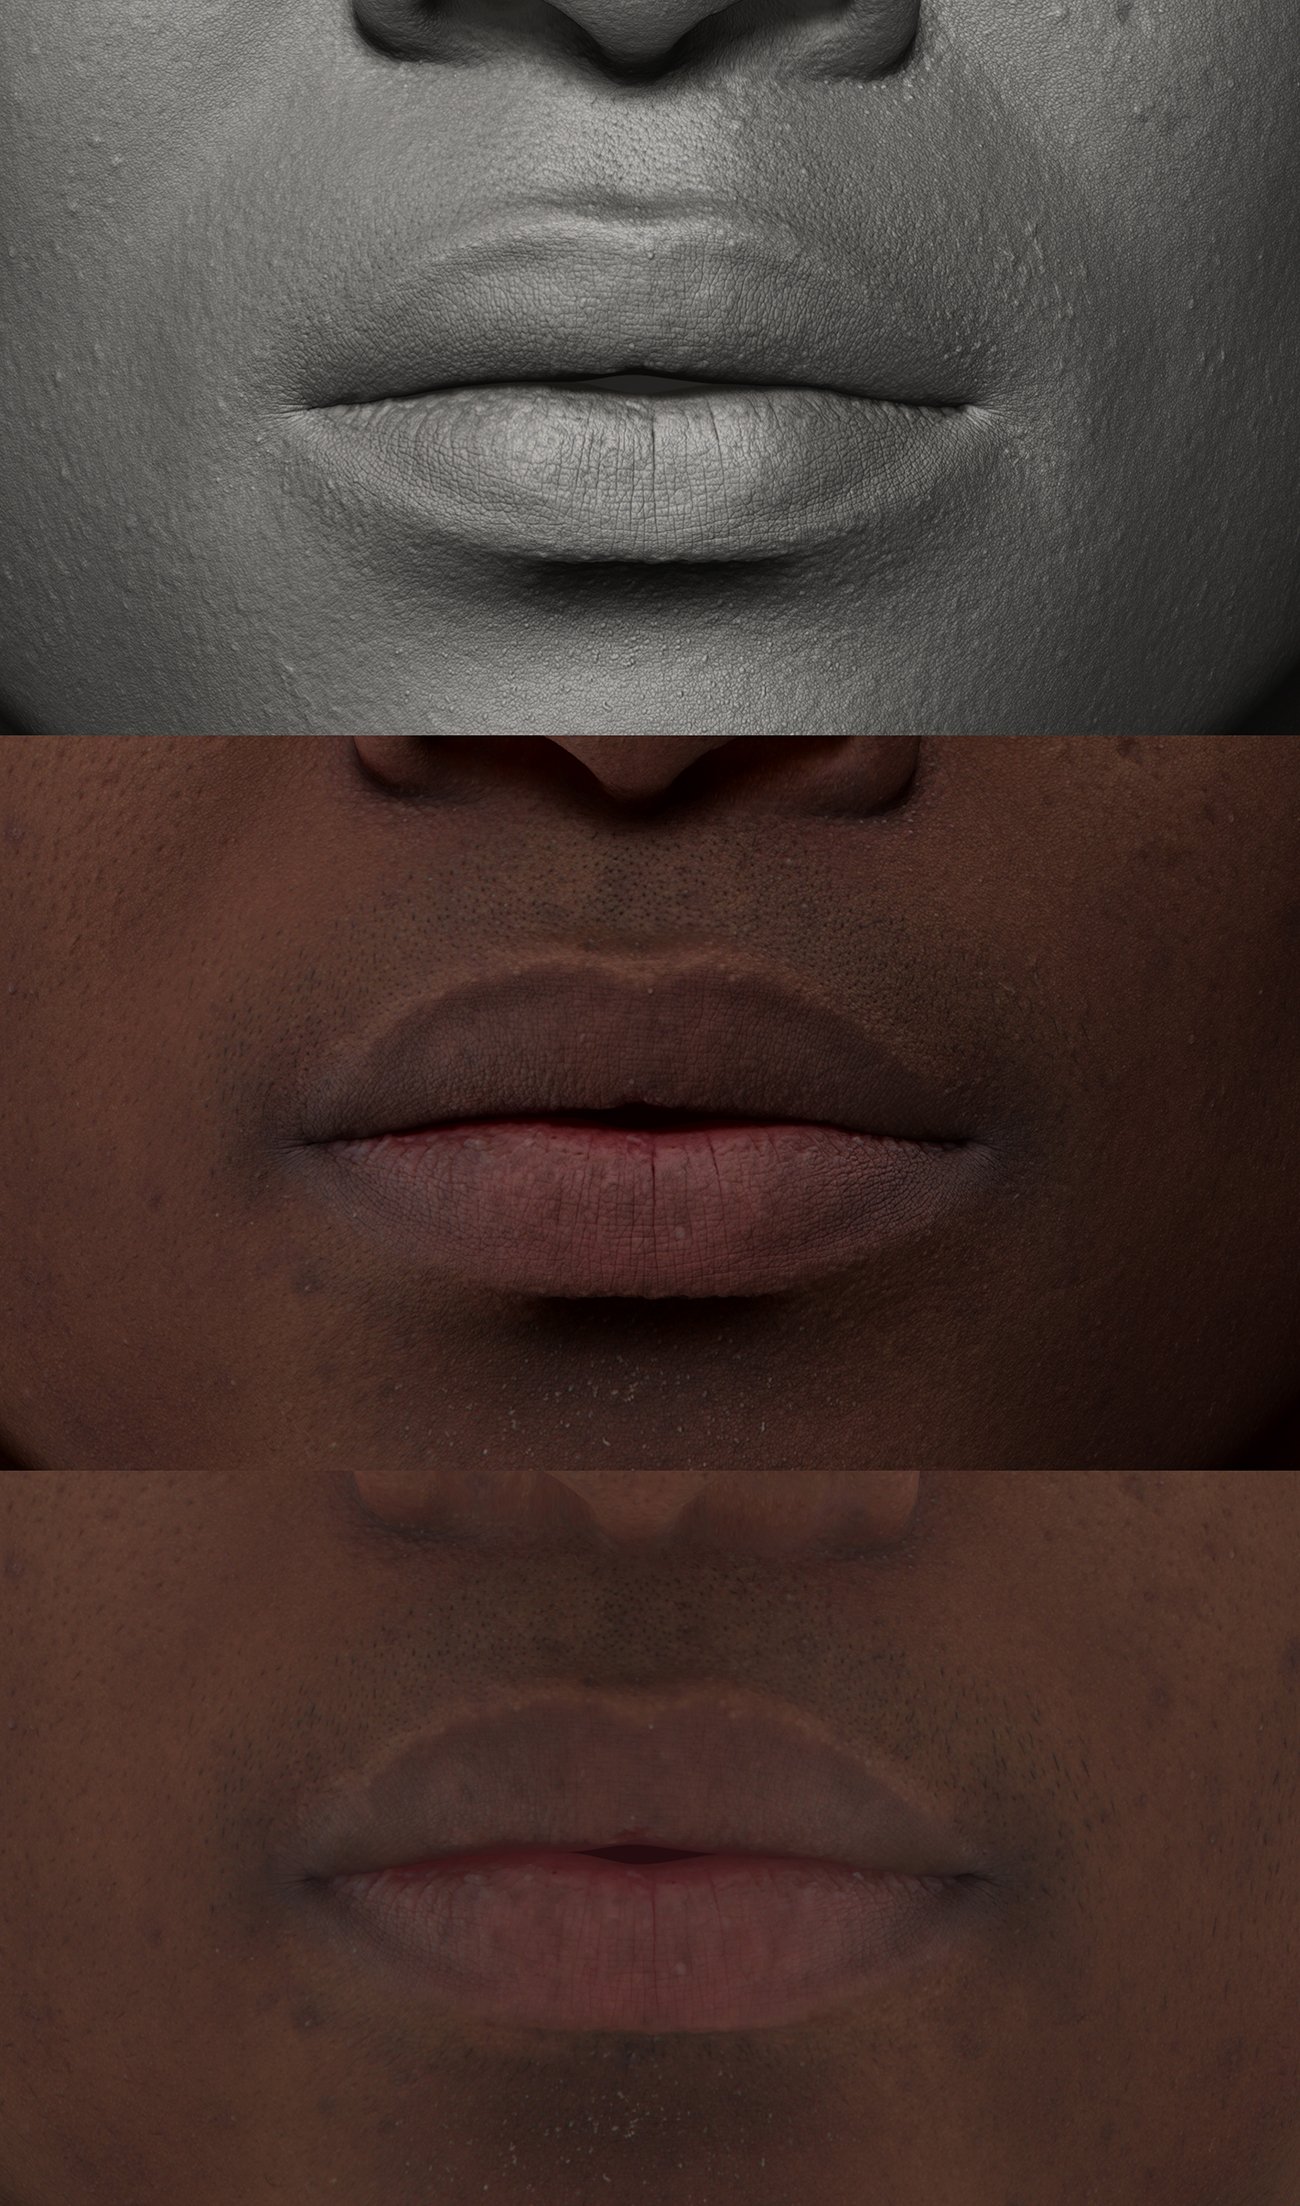 Human 3D Skin textures, UV mapping and texture maps